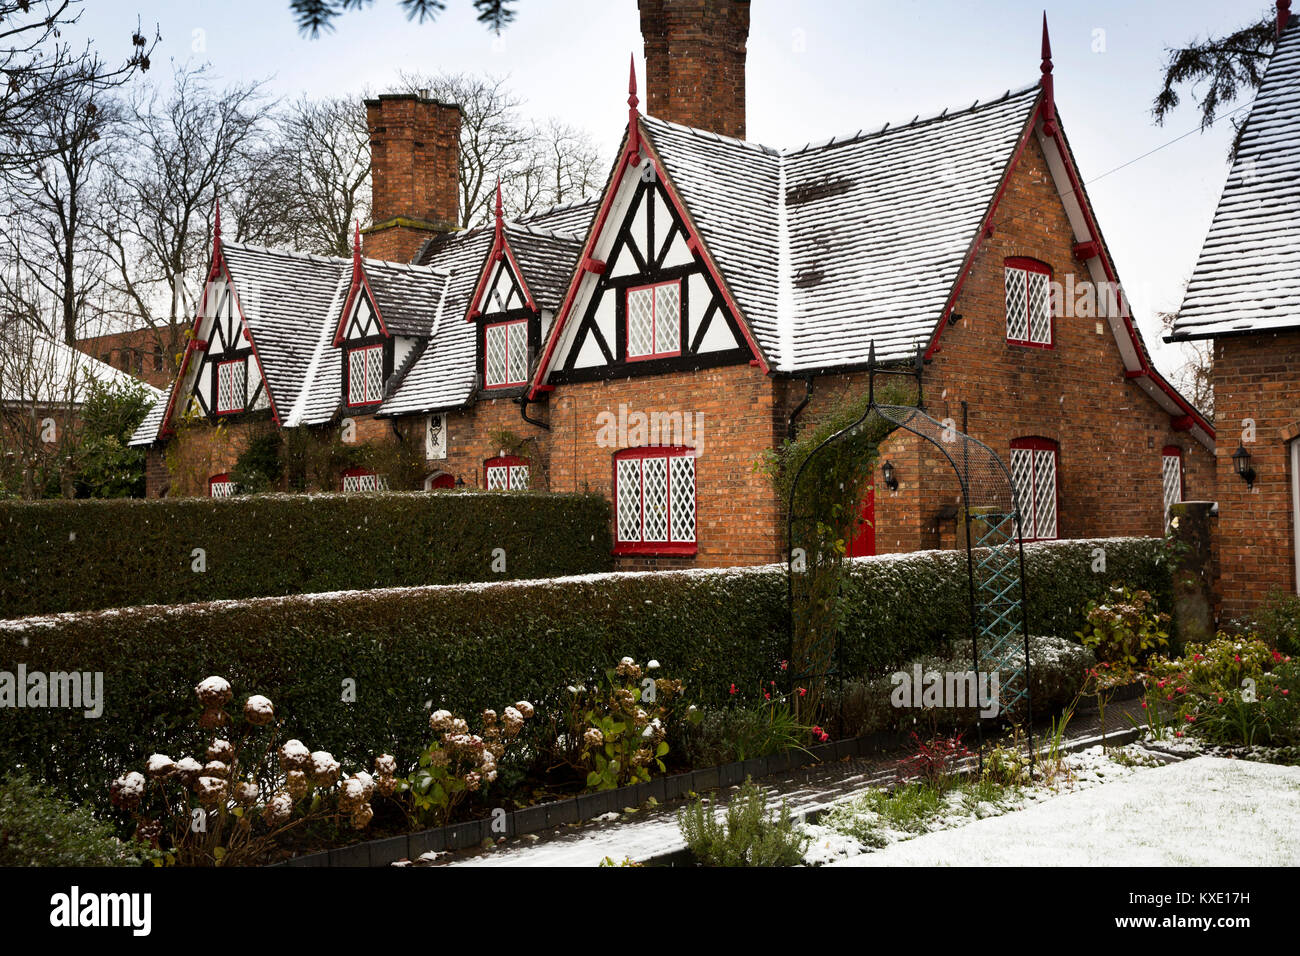 UK, England, Cheshire, Nantwich, Welsh Row, Sir Roger Wilbraham’s (Tollemache’s) Almshouses in snow Stock Photo